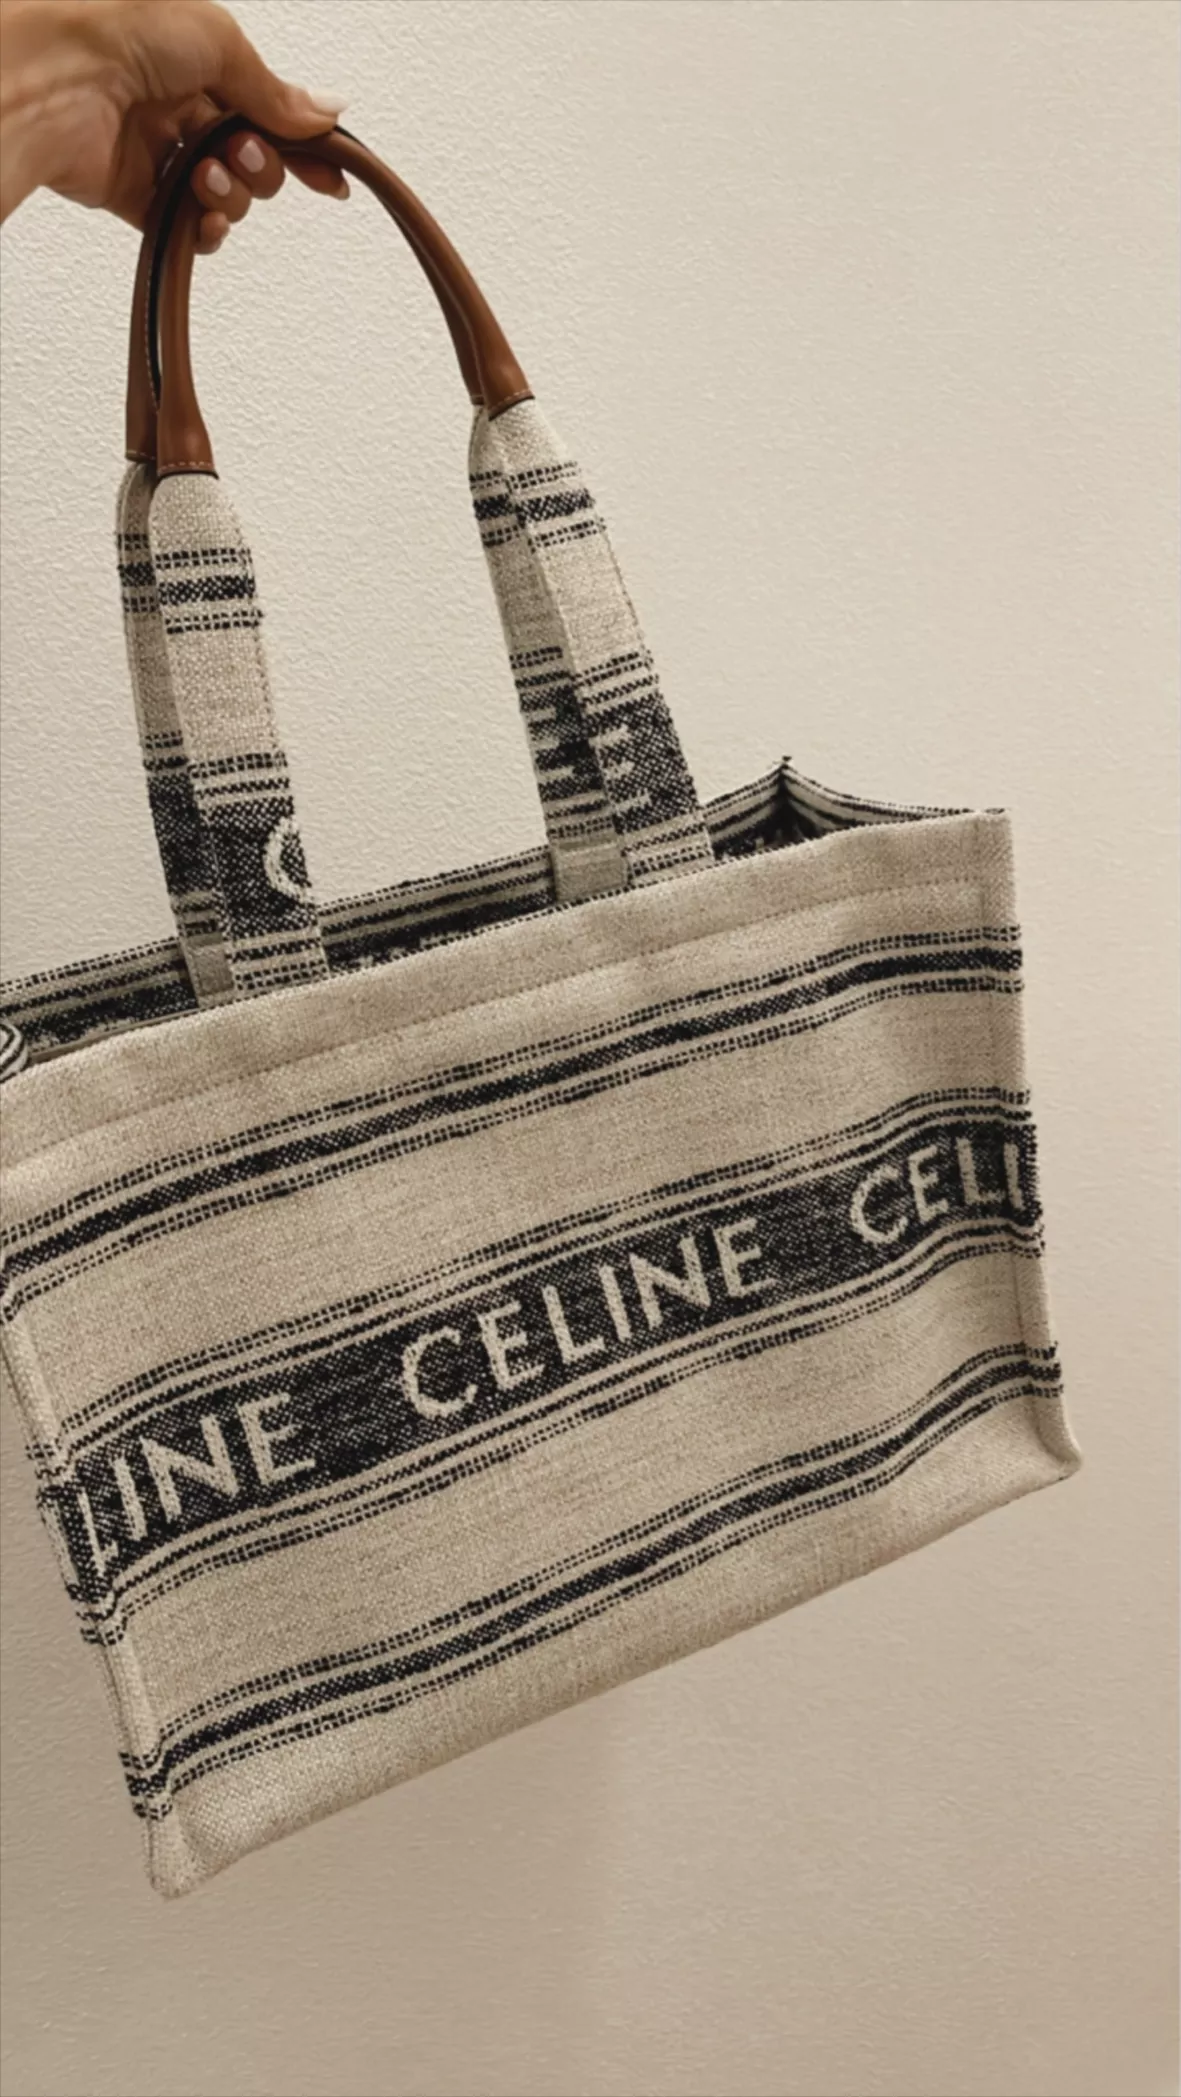 Celine Cabas Thais Small Jacquard Tote in Natural